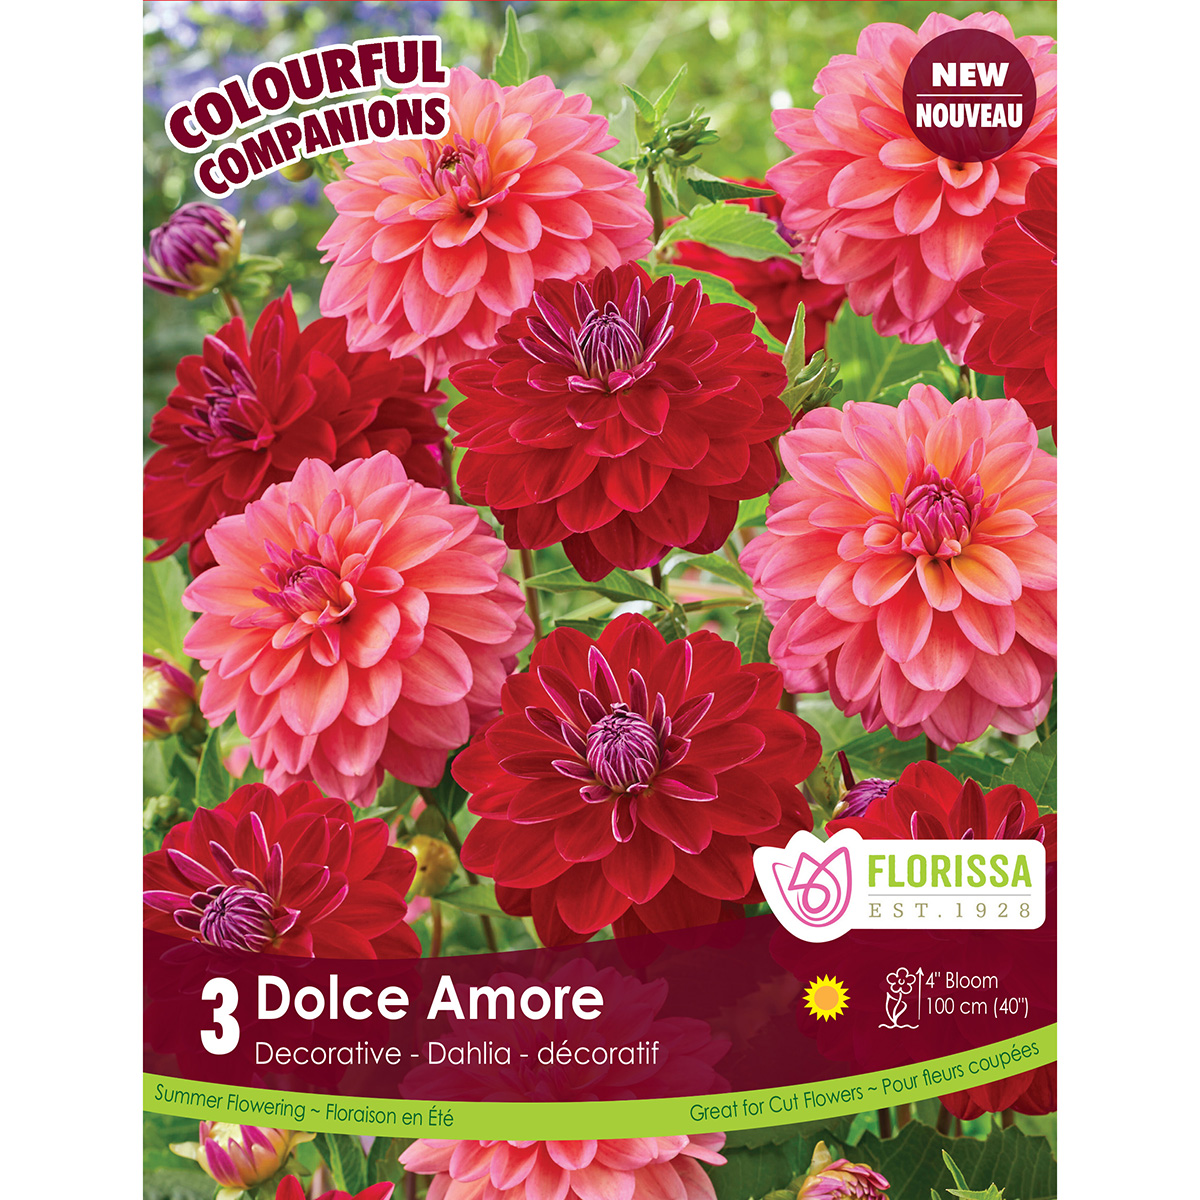 Colorful Companions 'Dolce Amore' Dahlia Tubers